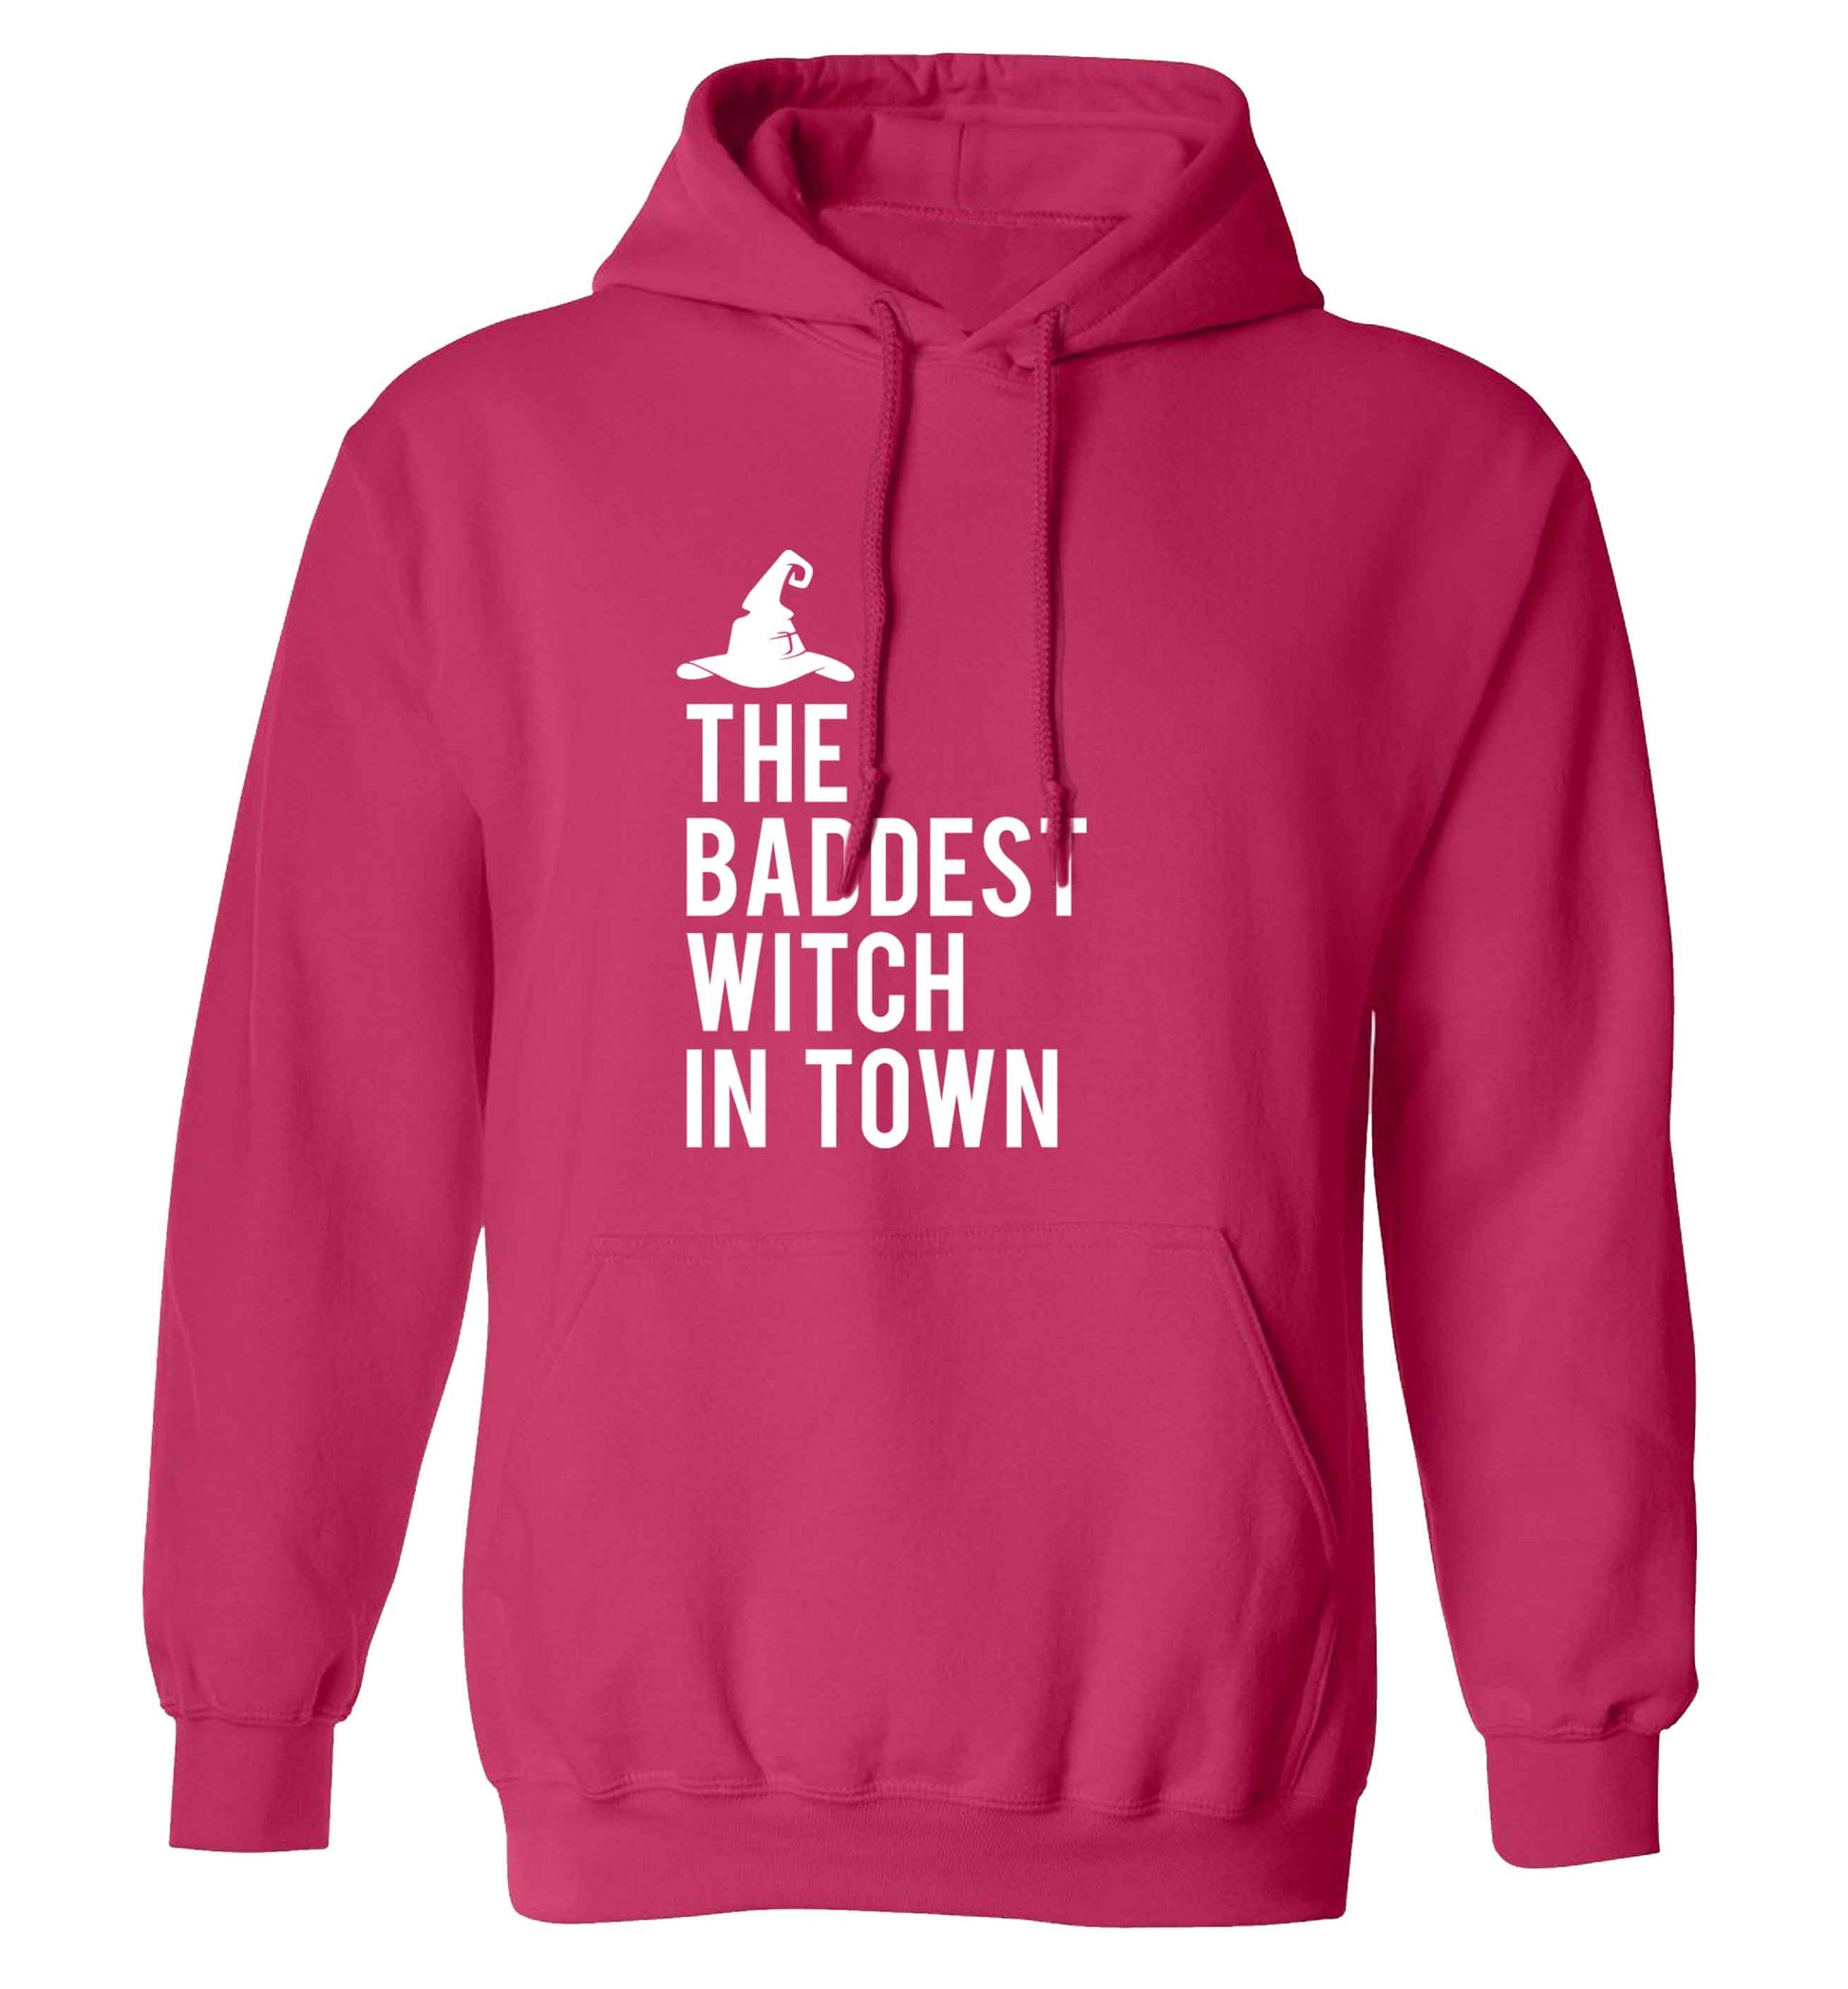 Badest witch in town adults unisex pink hoodie 2XL